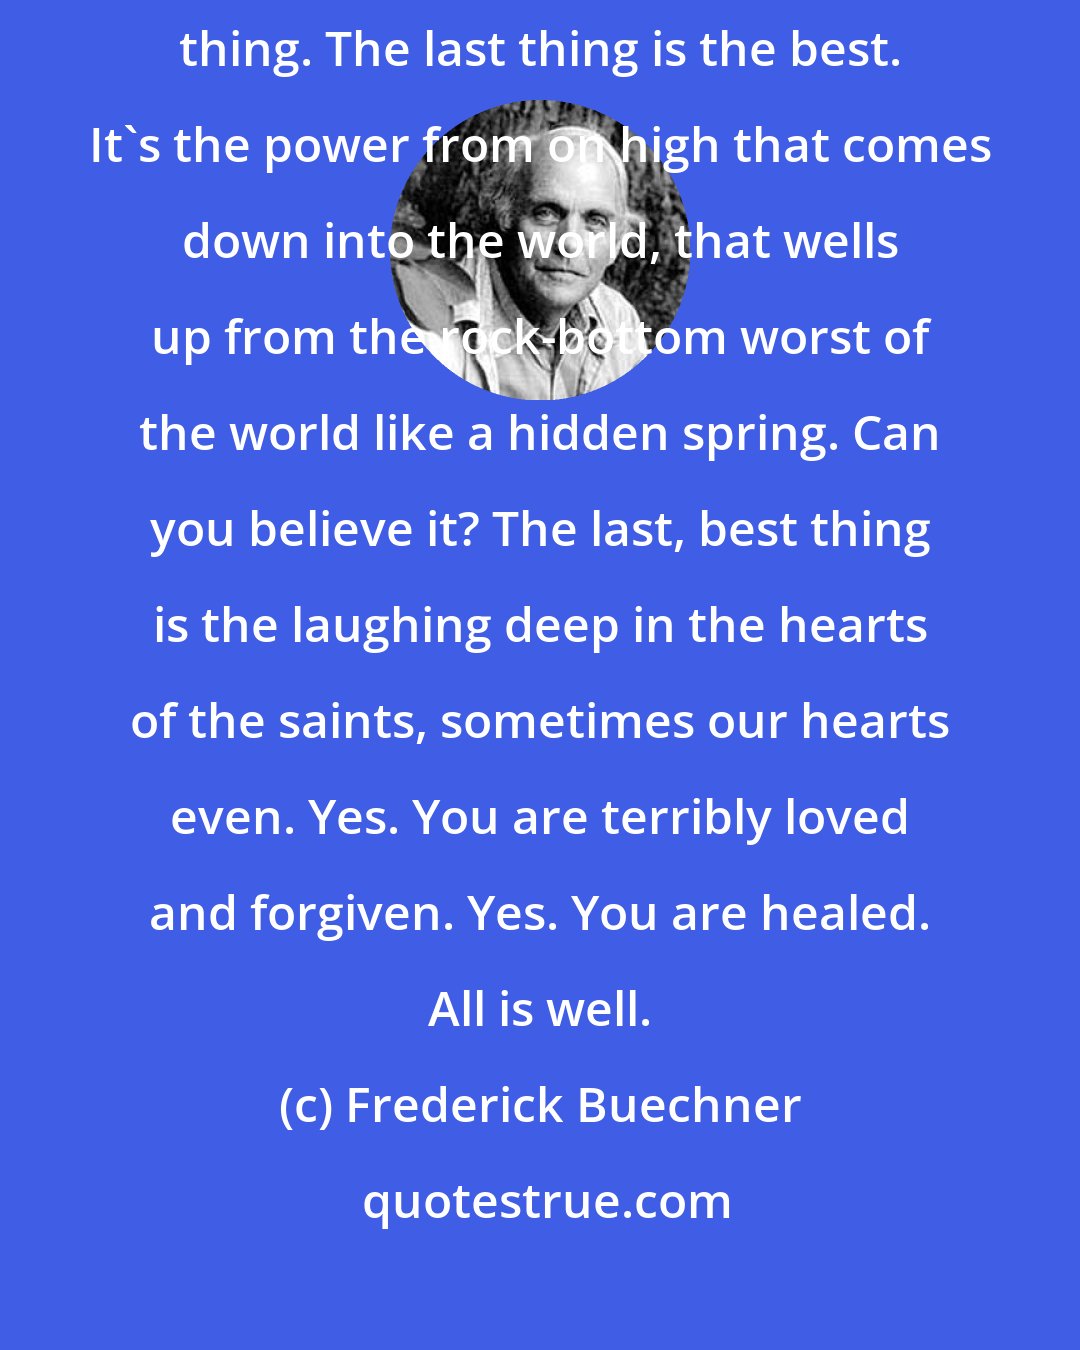 Frederick Buechner: The worst isn't the last thing about the world. It's the next to the last thing. The last thing is the best. It's the power from on high that comes down into the world, that wells up from the rock-bottom worst of the world like a hidden spring. Can you believe it? The last, best thing is the laughing deep in the hearts of the saints, sometimes our hearts even. Yes. You are terribly loved and forgiven. Yes. You are healed. All is well.